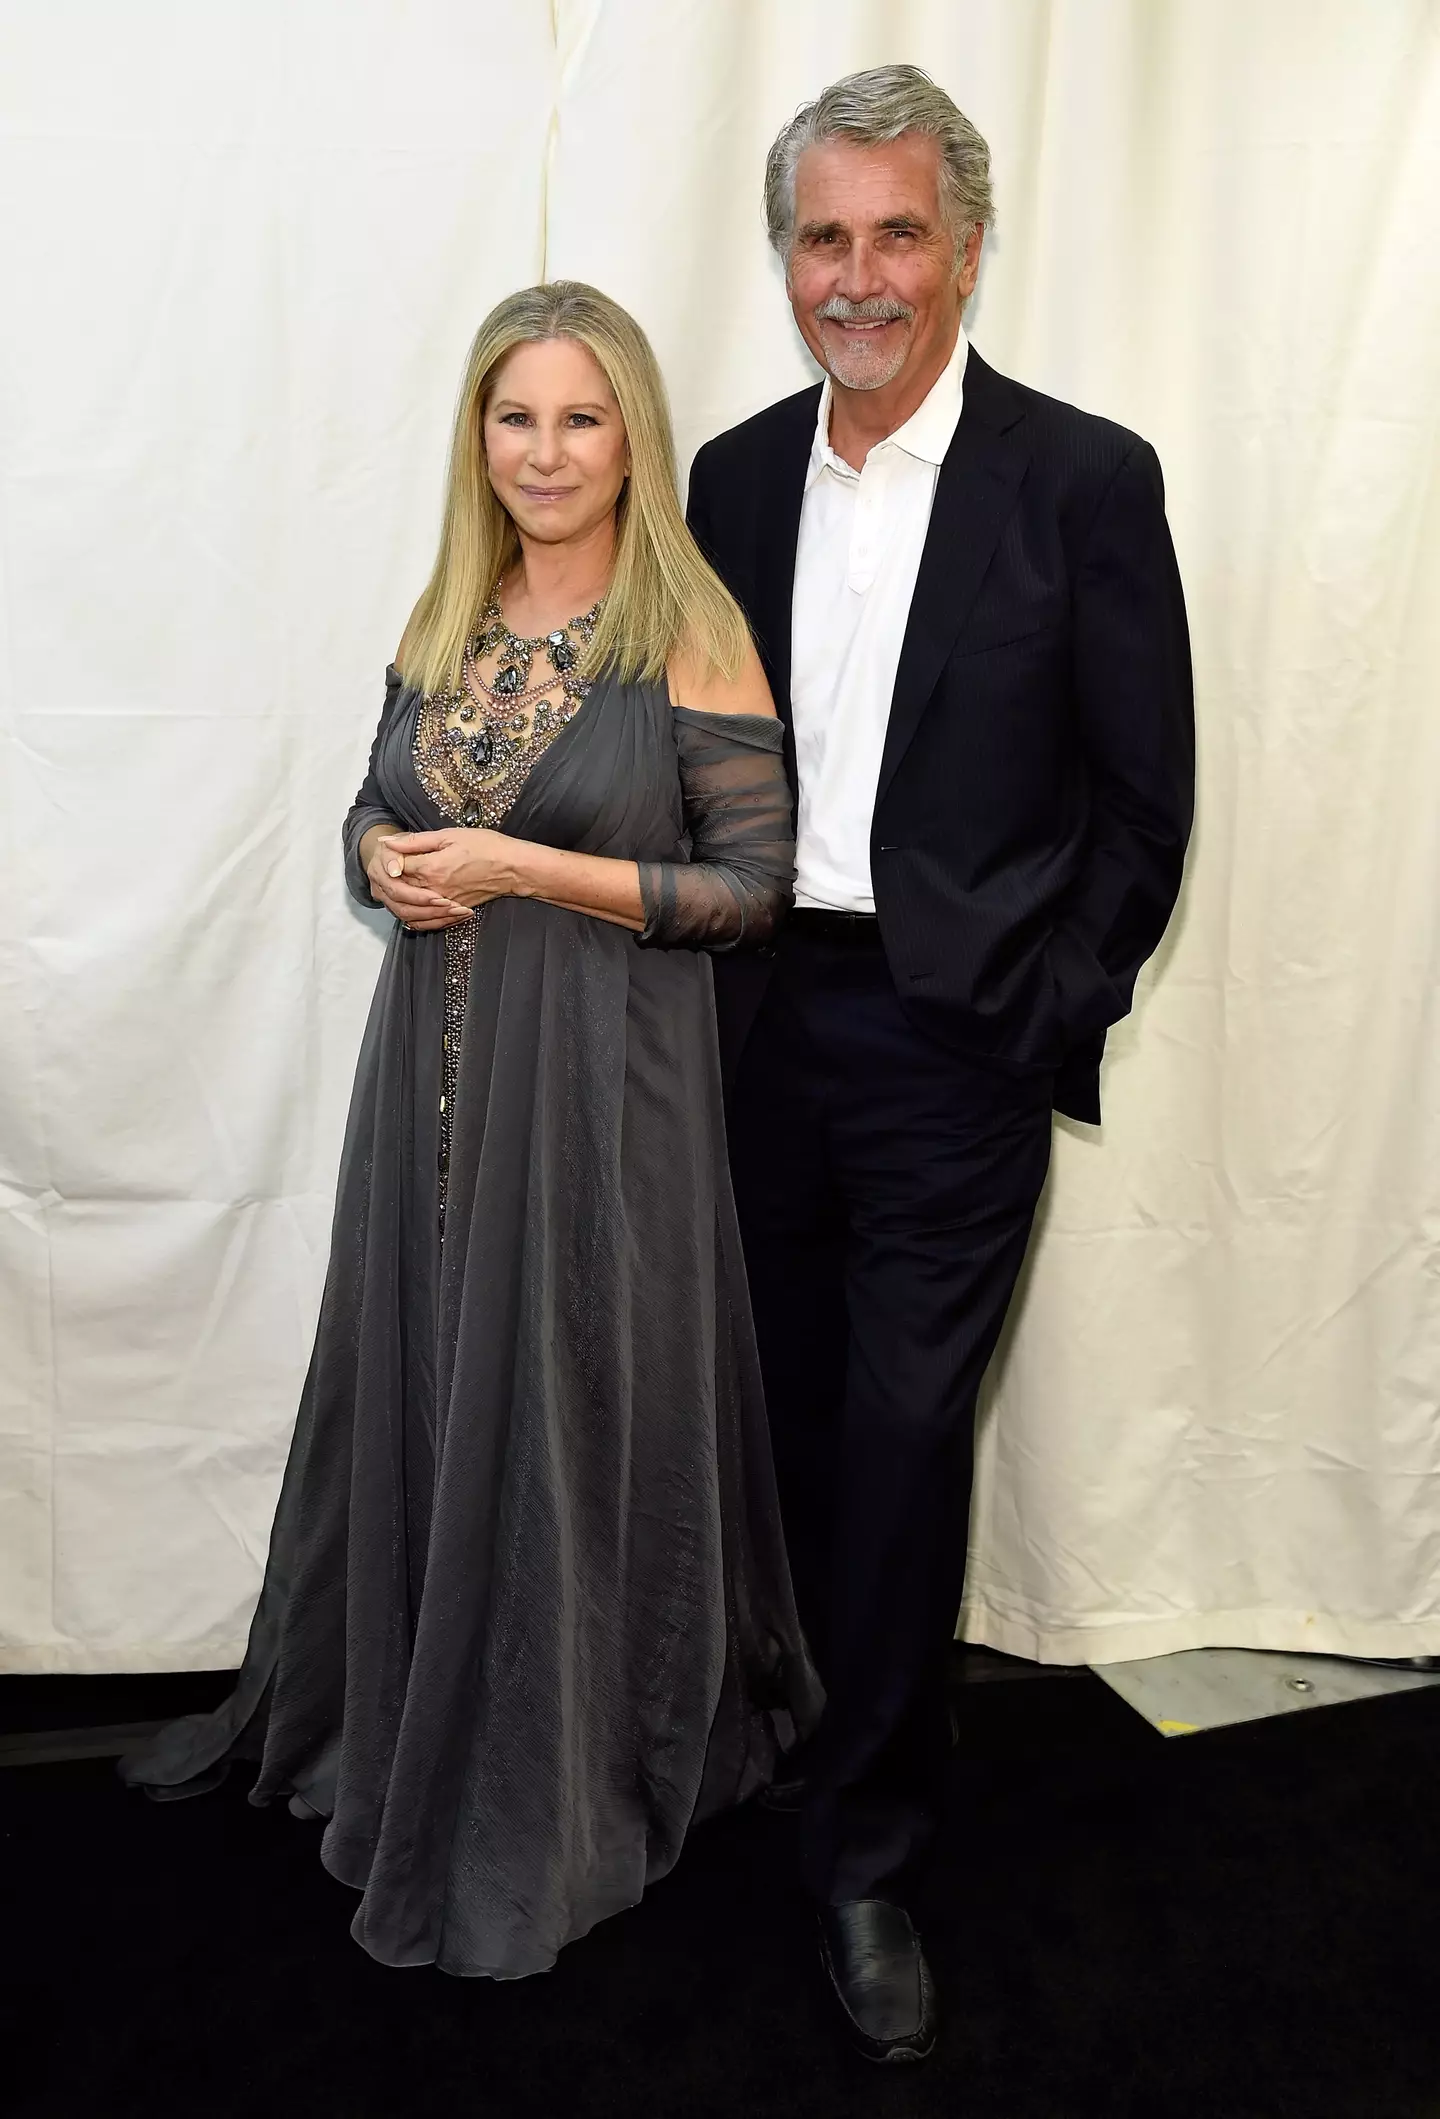 Barbra Streisand and James Brolin didn't have sex before their marriage.